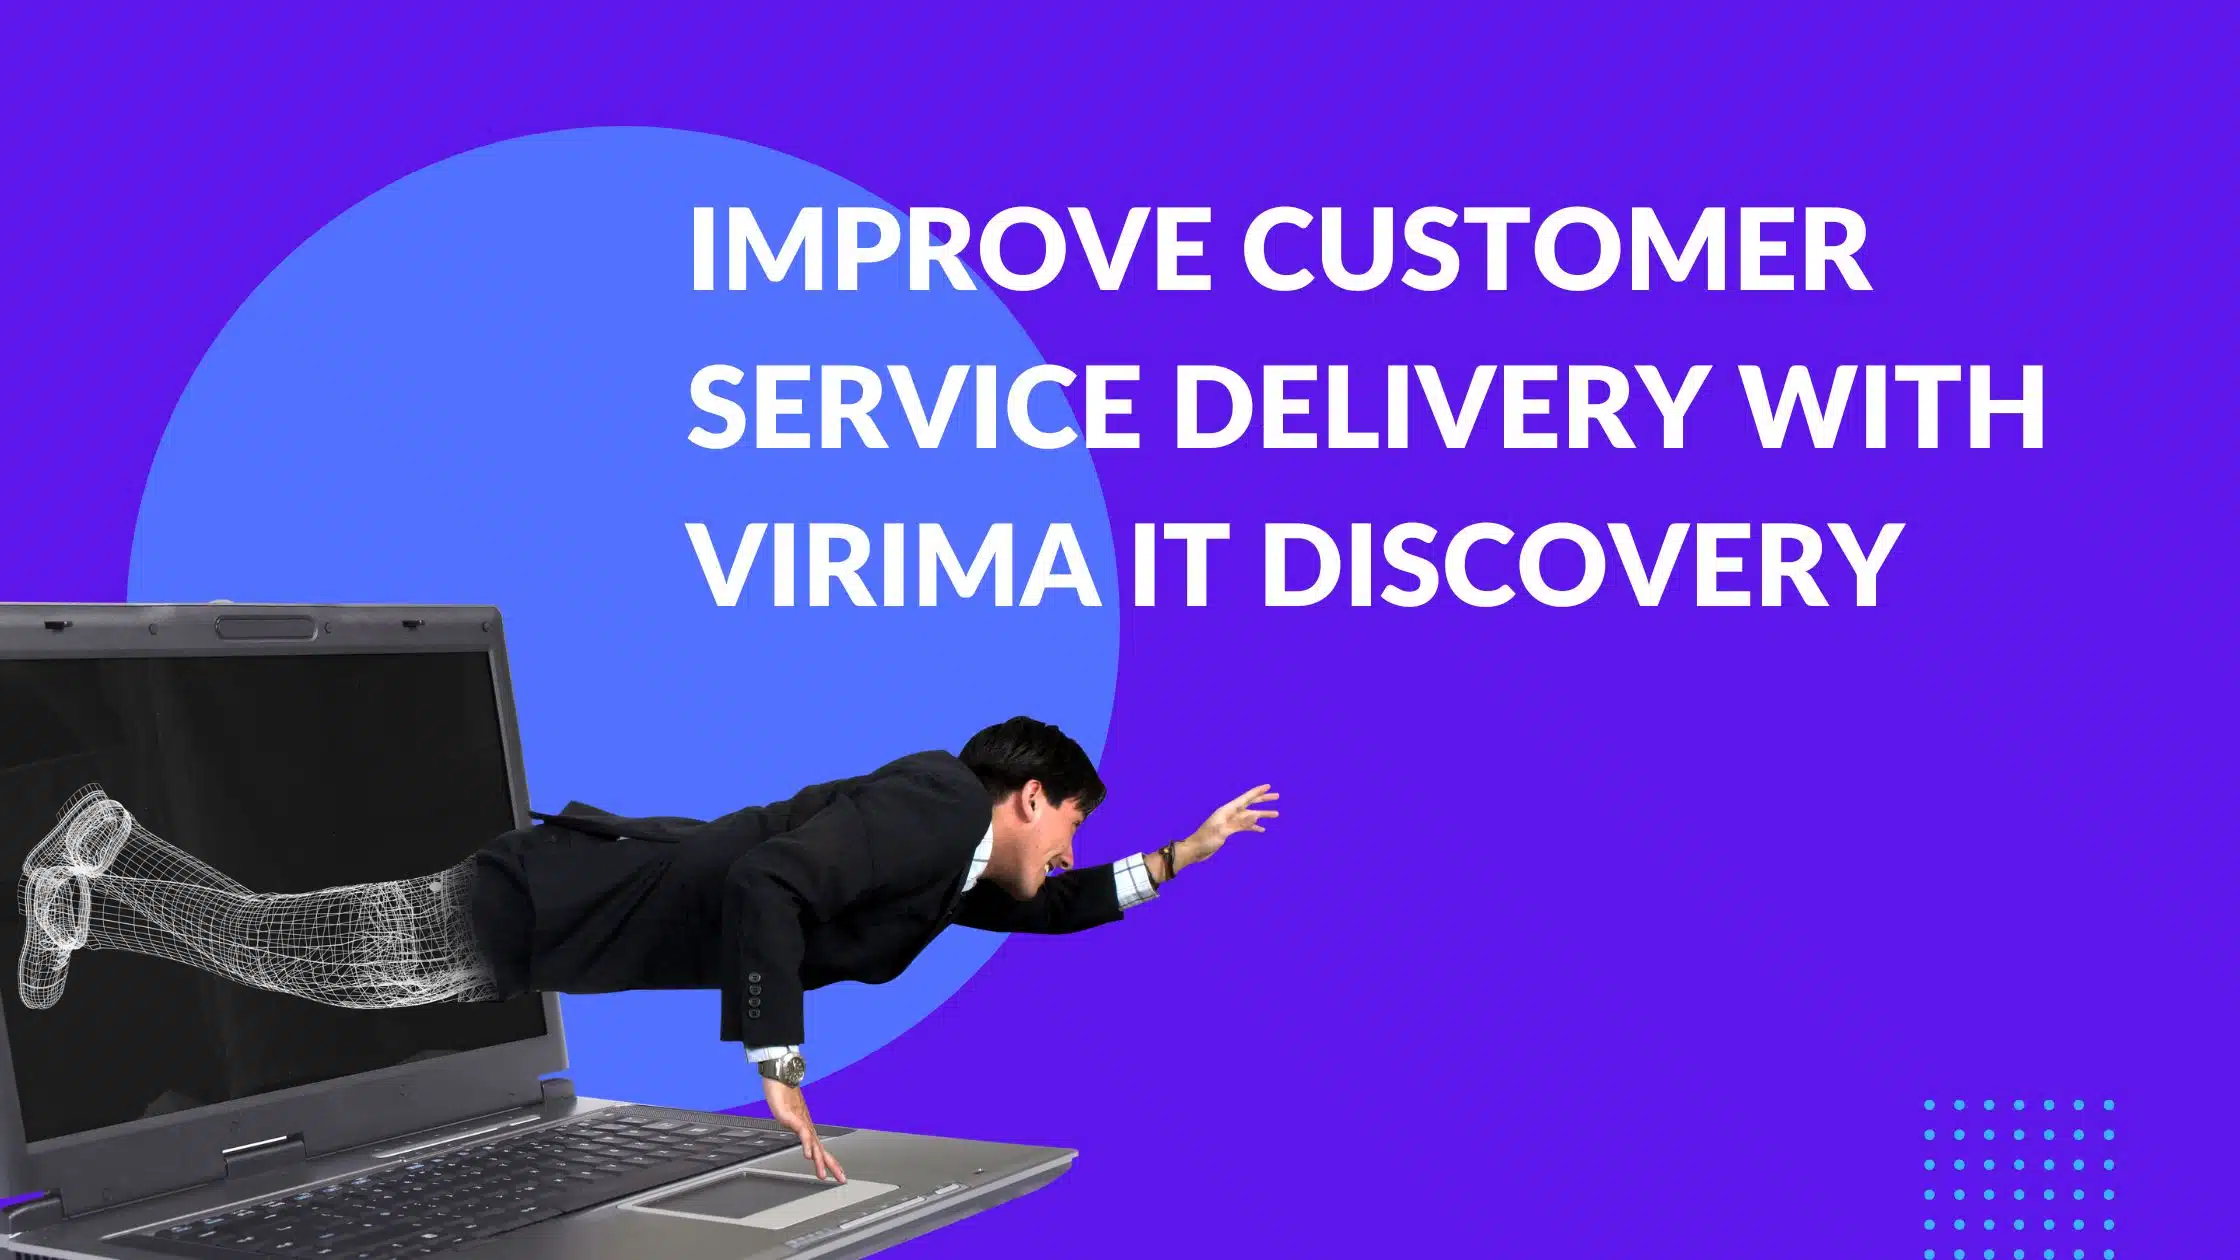 Improve customer service delivery with Virima IT discovery